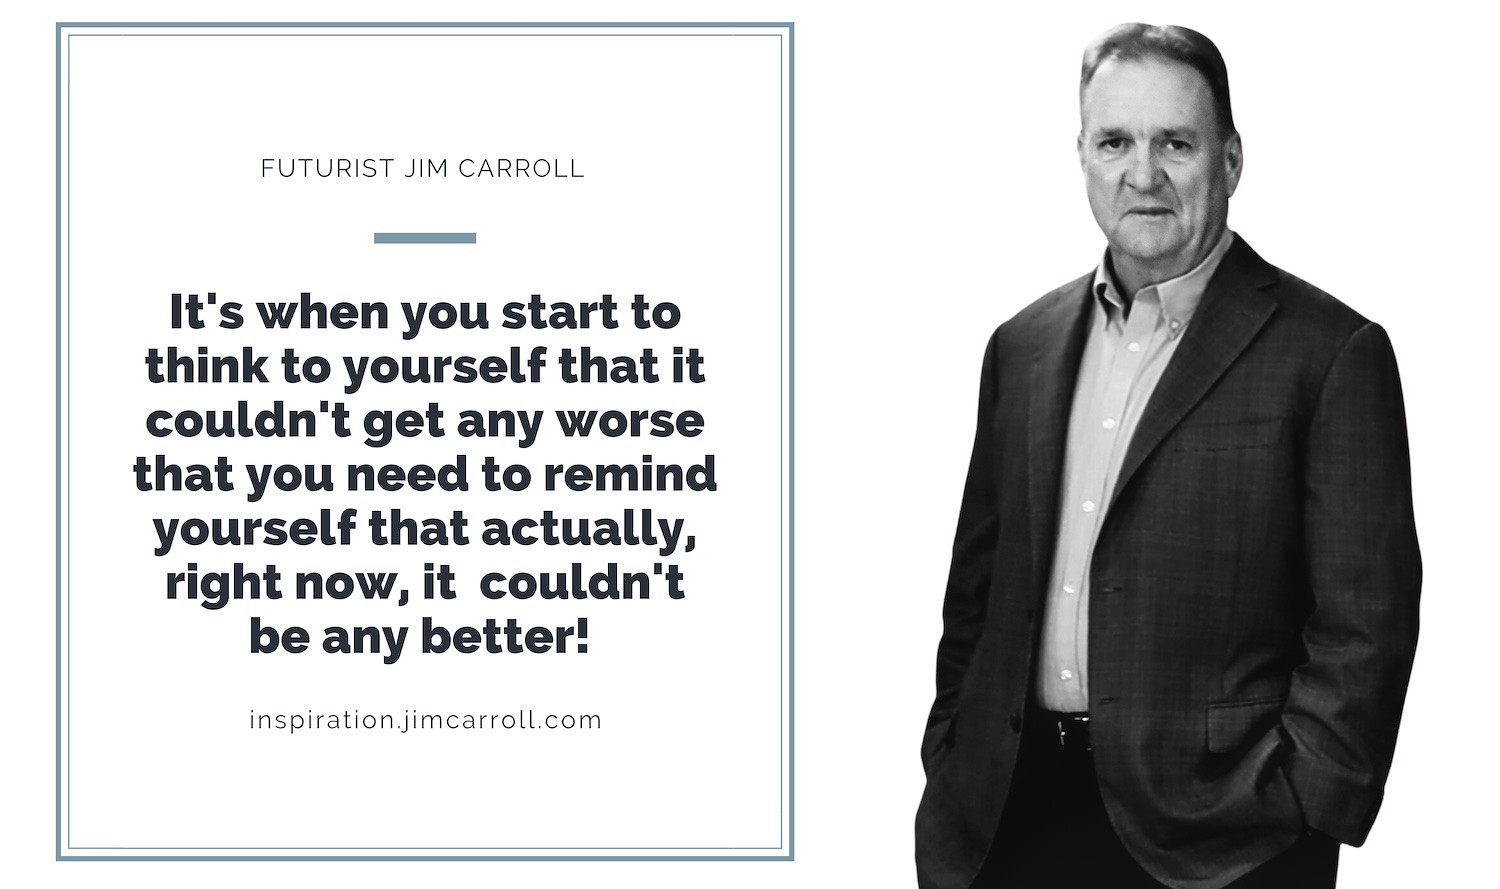 "It's when you start to think to yourself that it couldn't get any worse that you need to remind yourself that actually, right now, it couldn't be any better!" - Futurist Jim Carroll